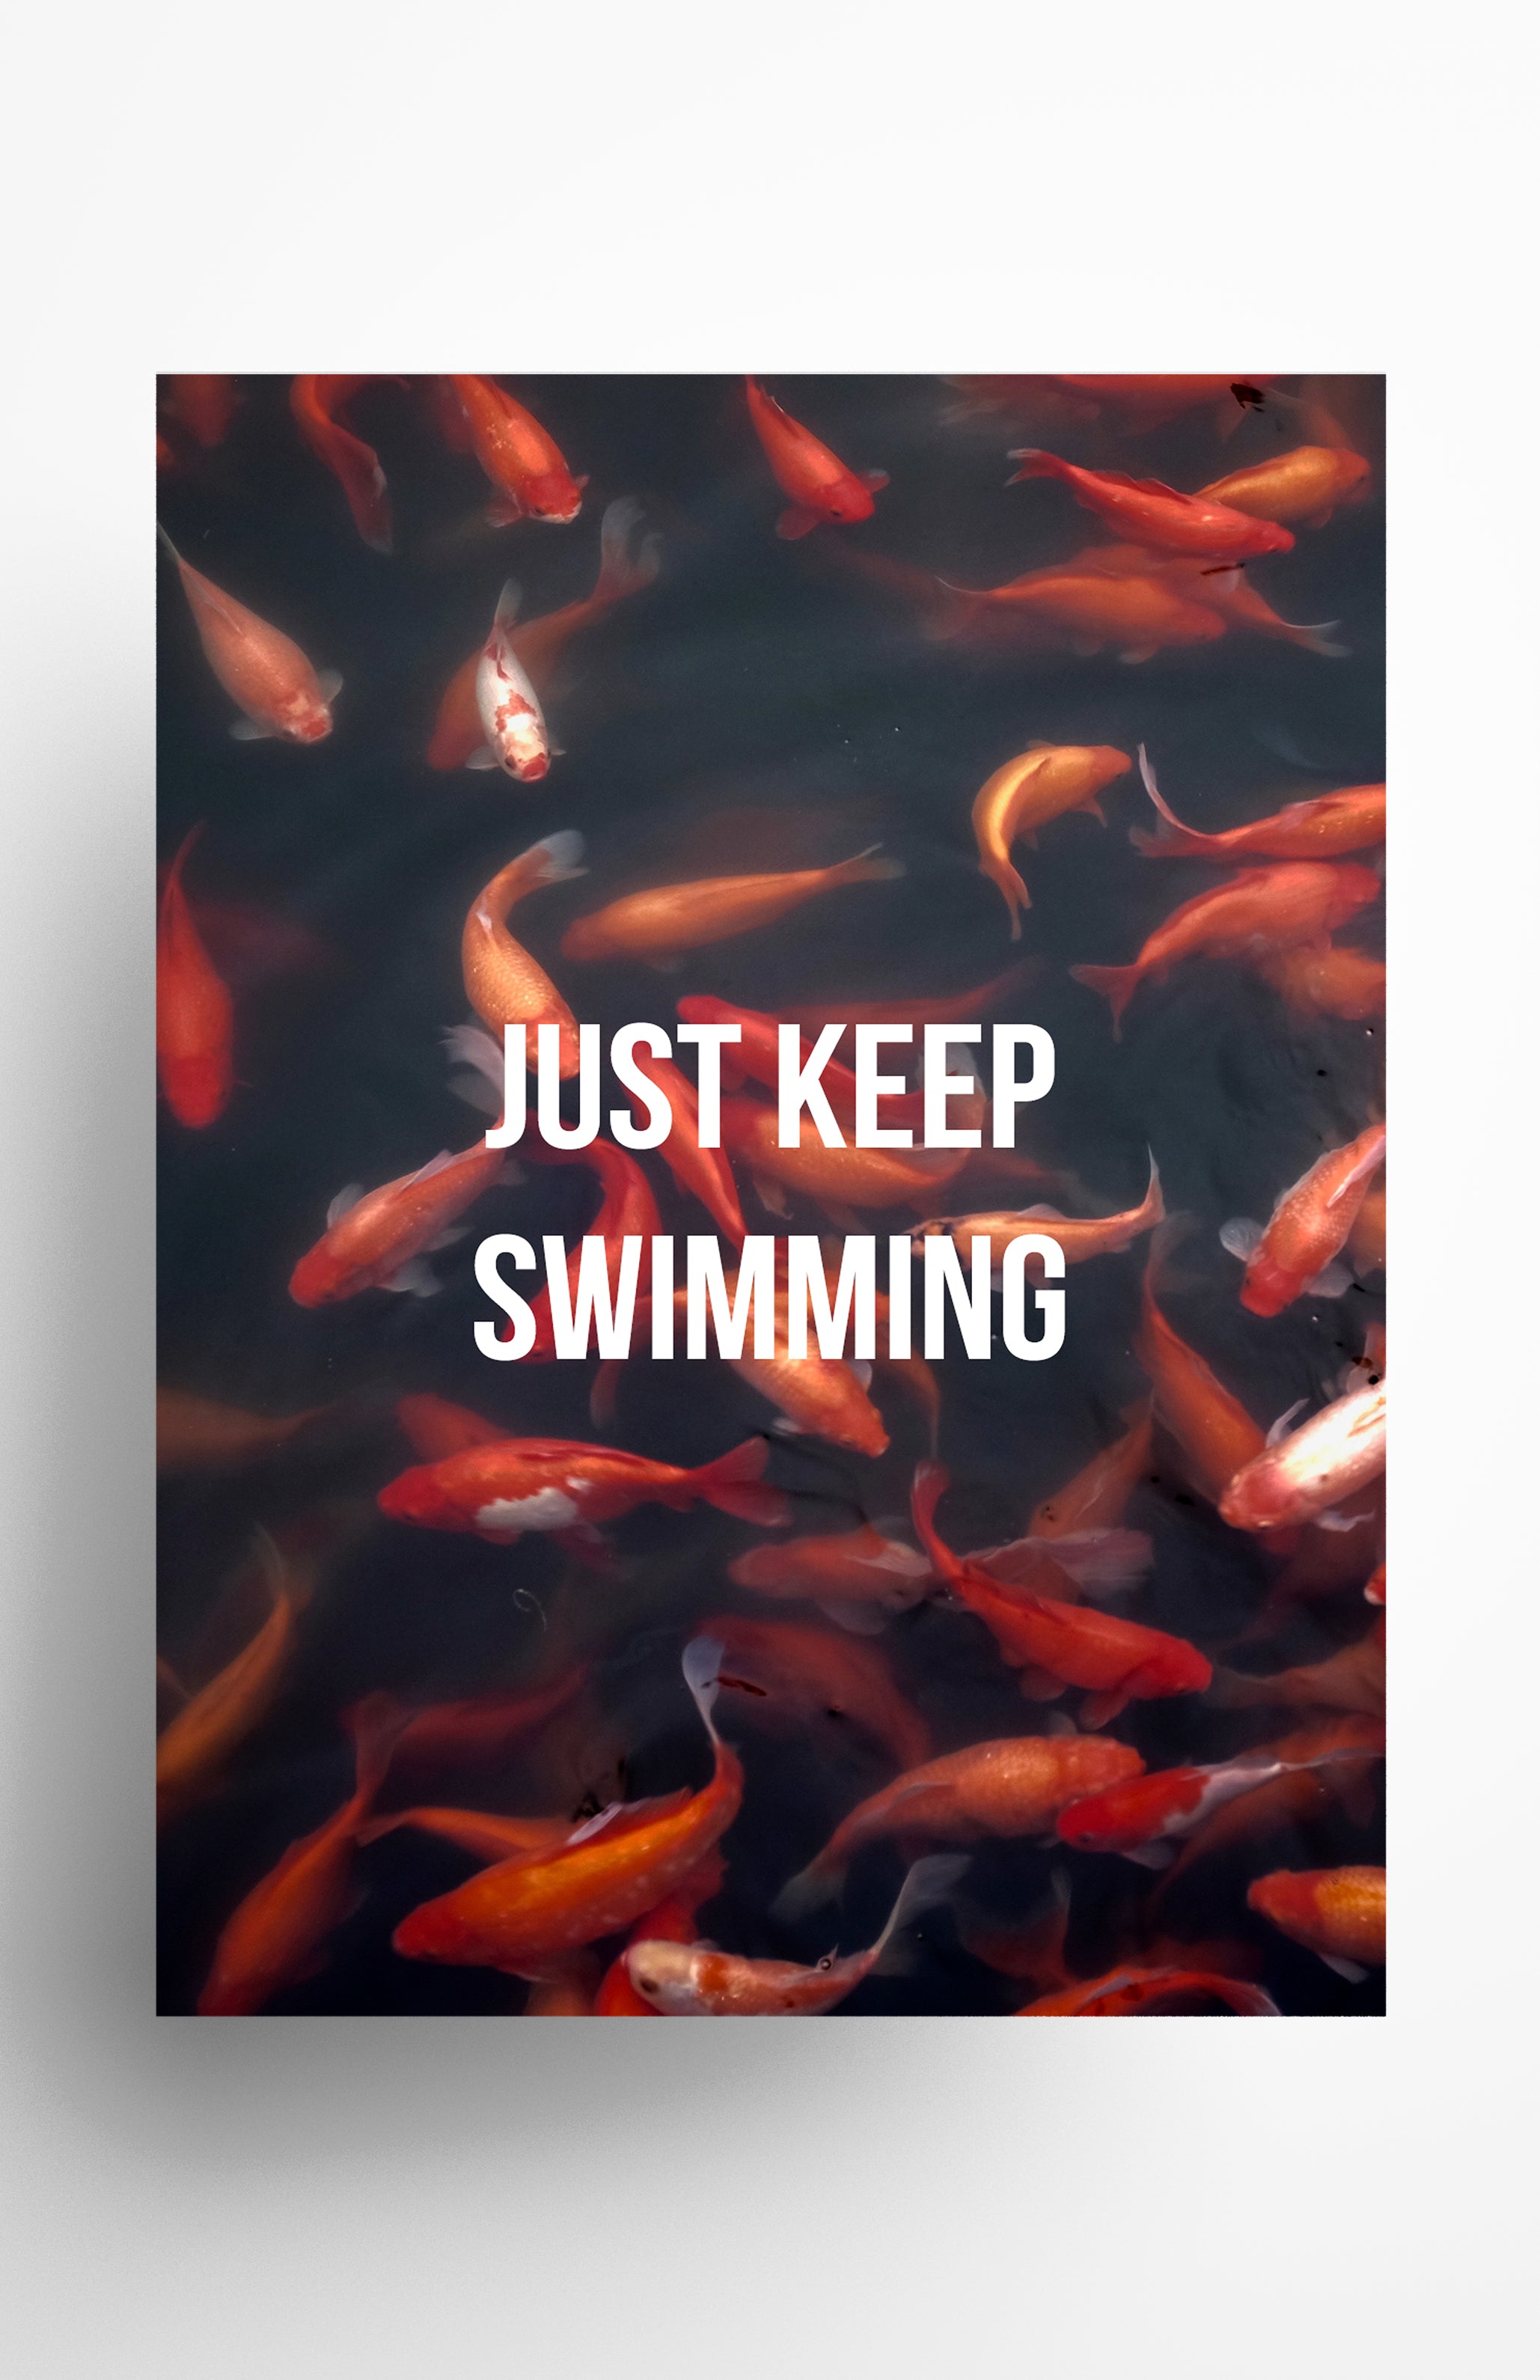 V3 Apparel womens Just Keep Swimming, Motivational posters, mens inspirational wall artwork and empowering poster quote designs for office, home gym, school, kitchen and living room.